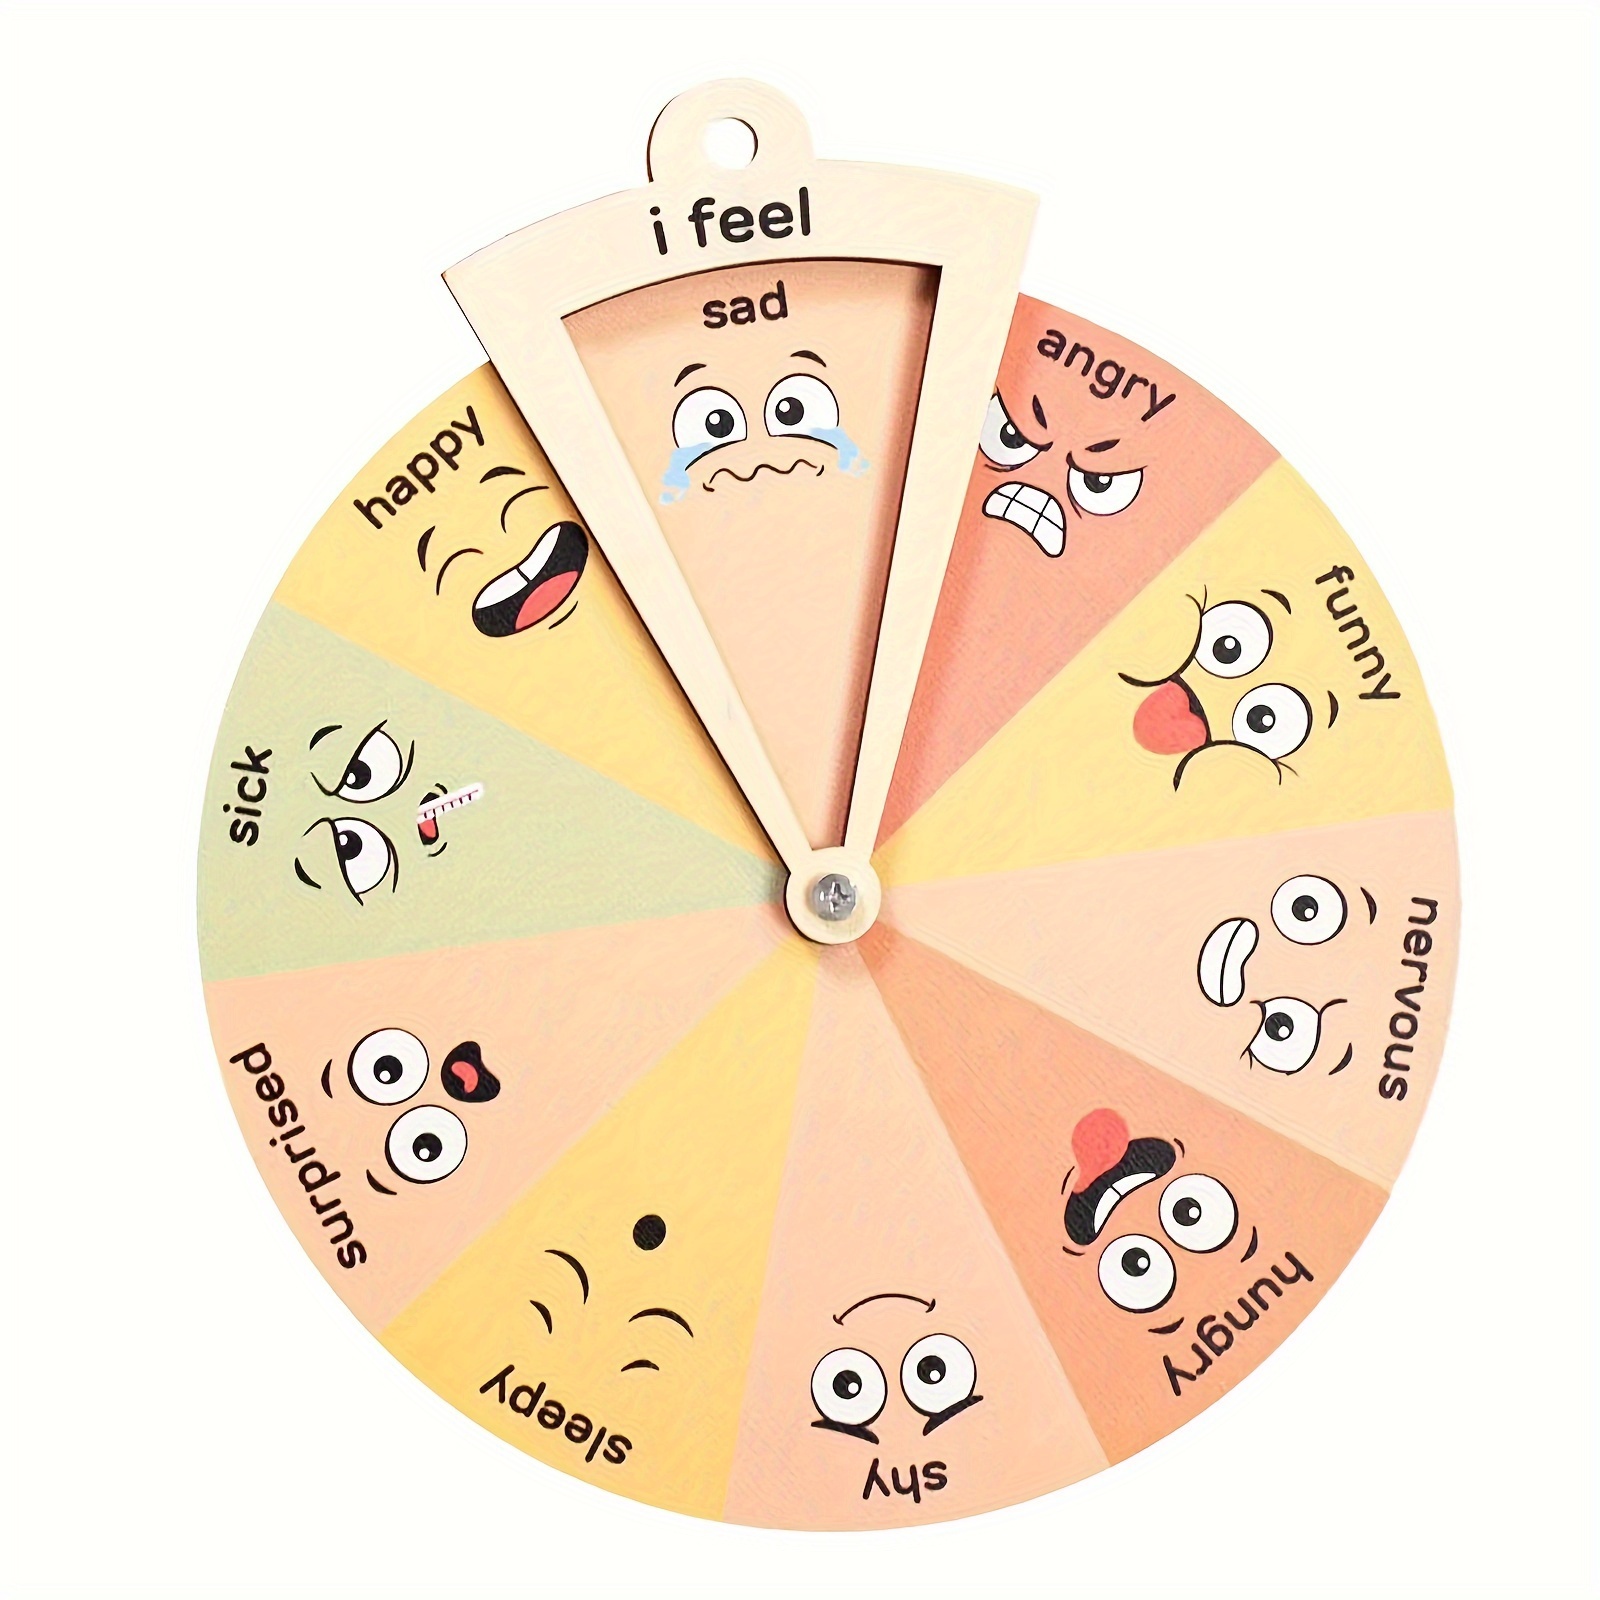 

1pc, Regulation Emotion Wheel Emotional Chart Emotional Adjustment Wheel Decoration, Wall Decor For Home, Classroom And Therapy Use